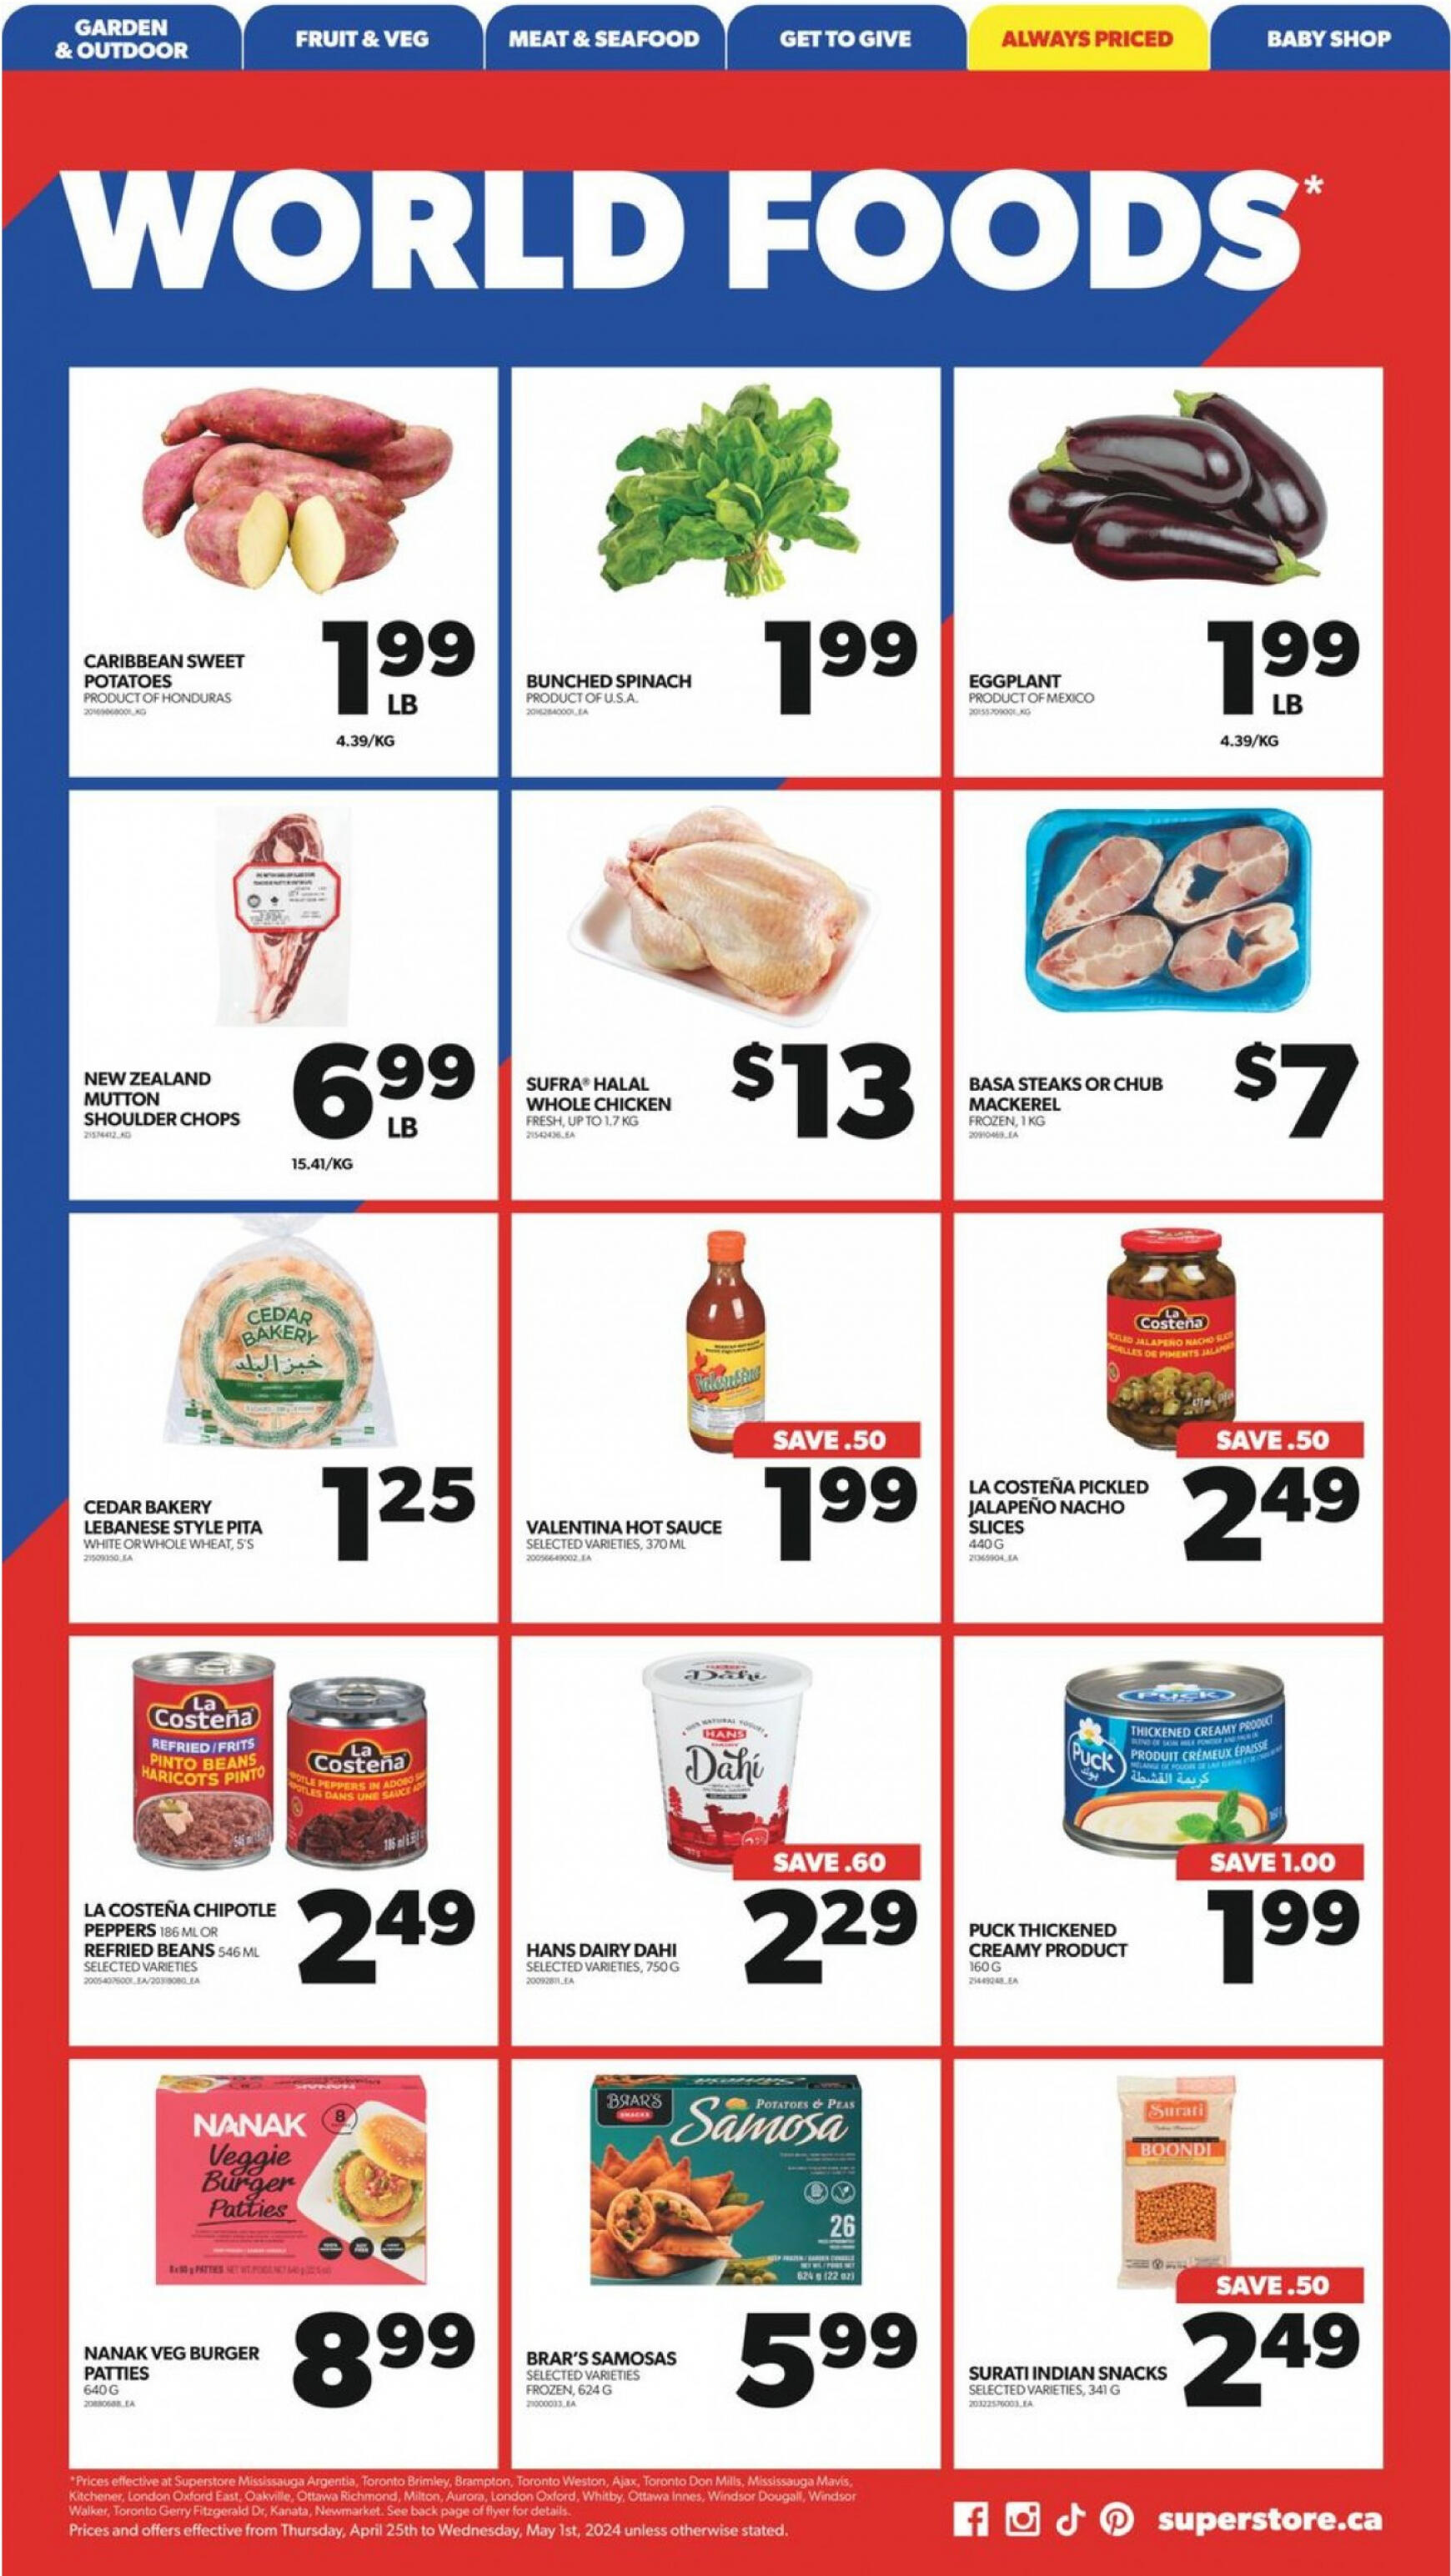 real-canadian-superstore - Real Canadian Superstore flyer current 01.05. - 31.05. - page: 32